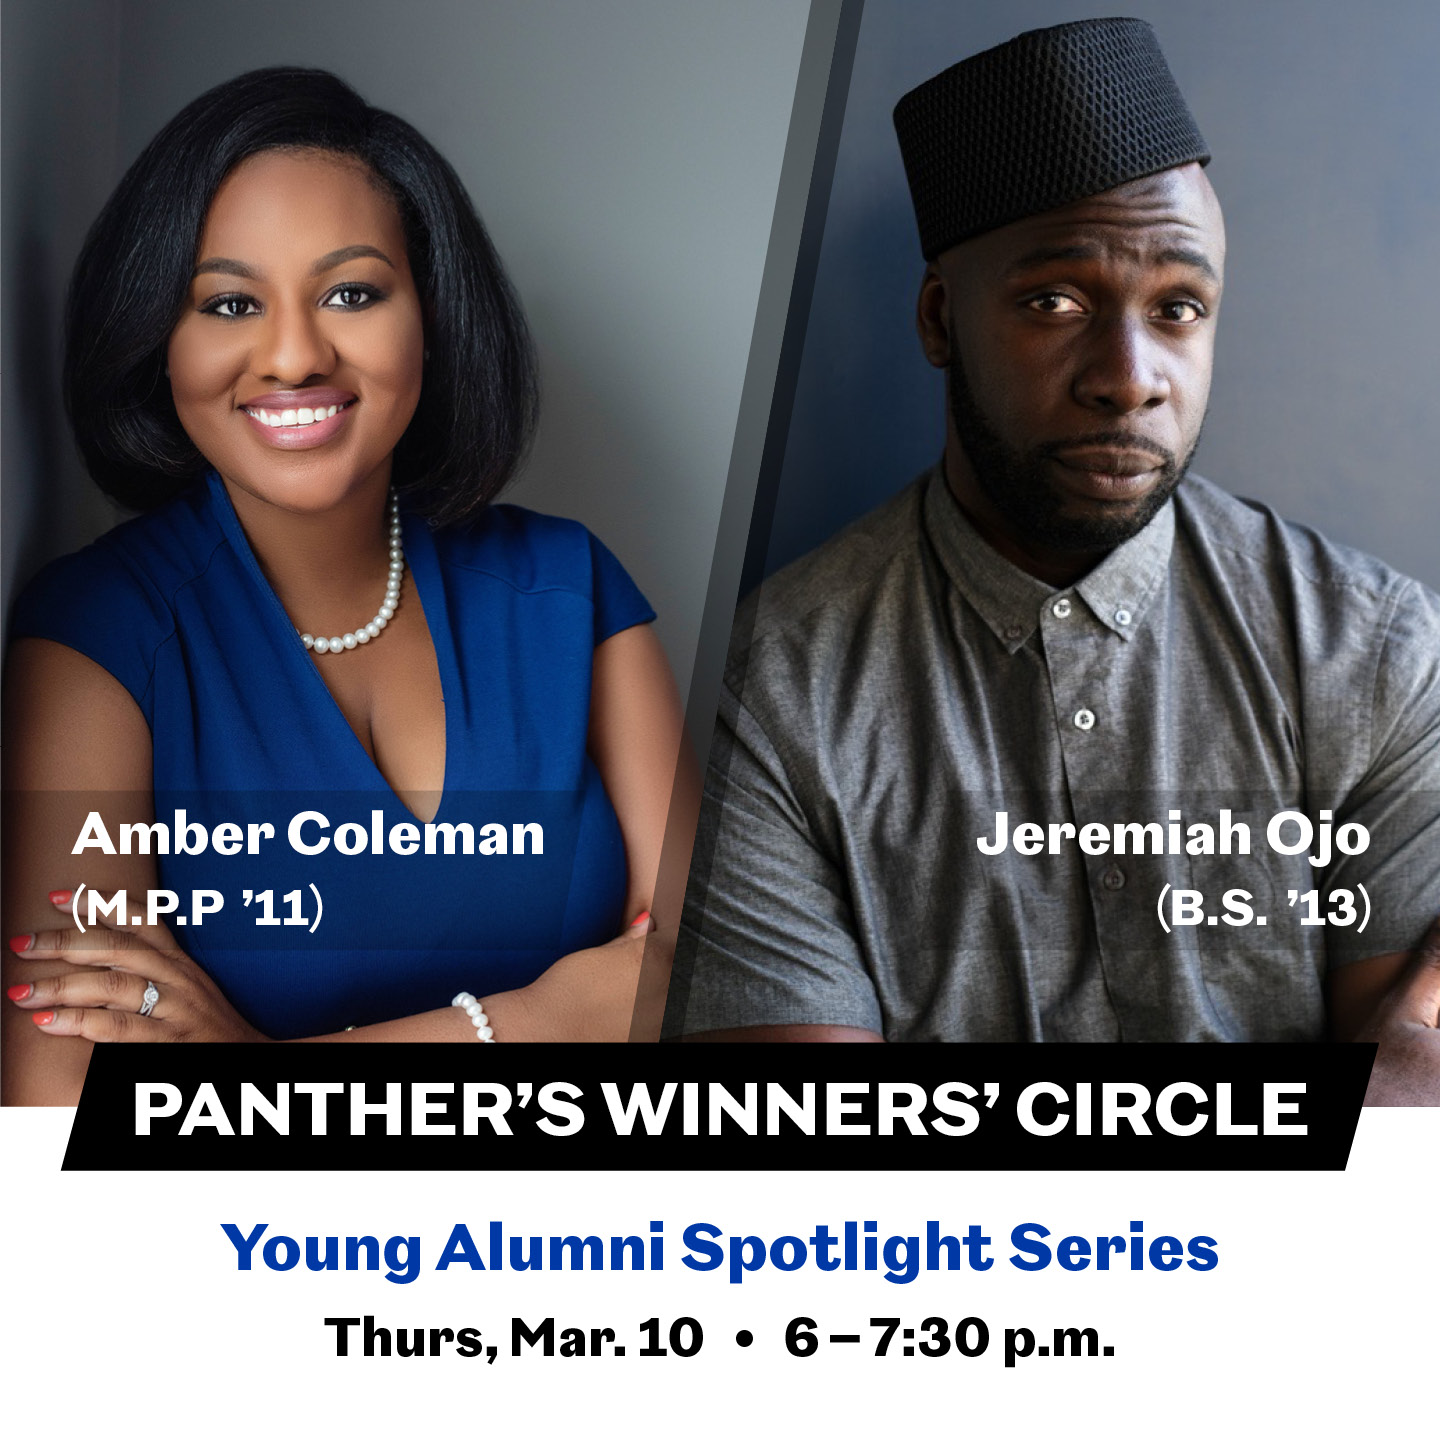 Image for Panther's Winners' Circle webinar